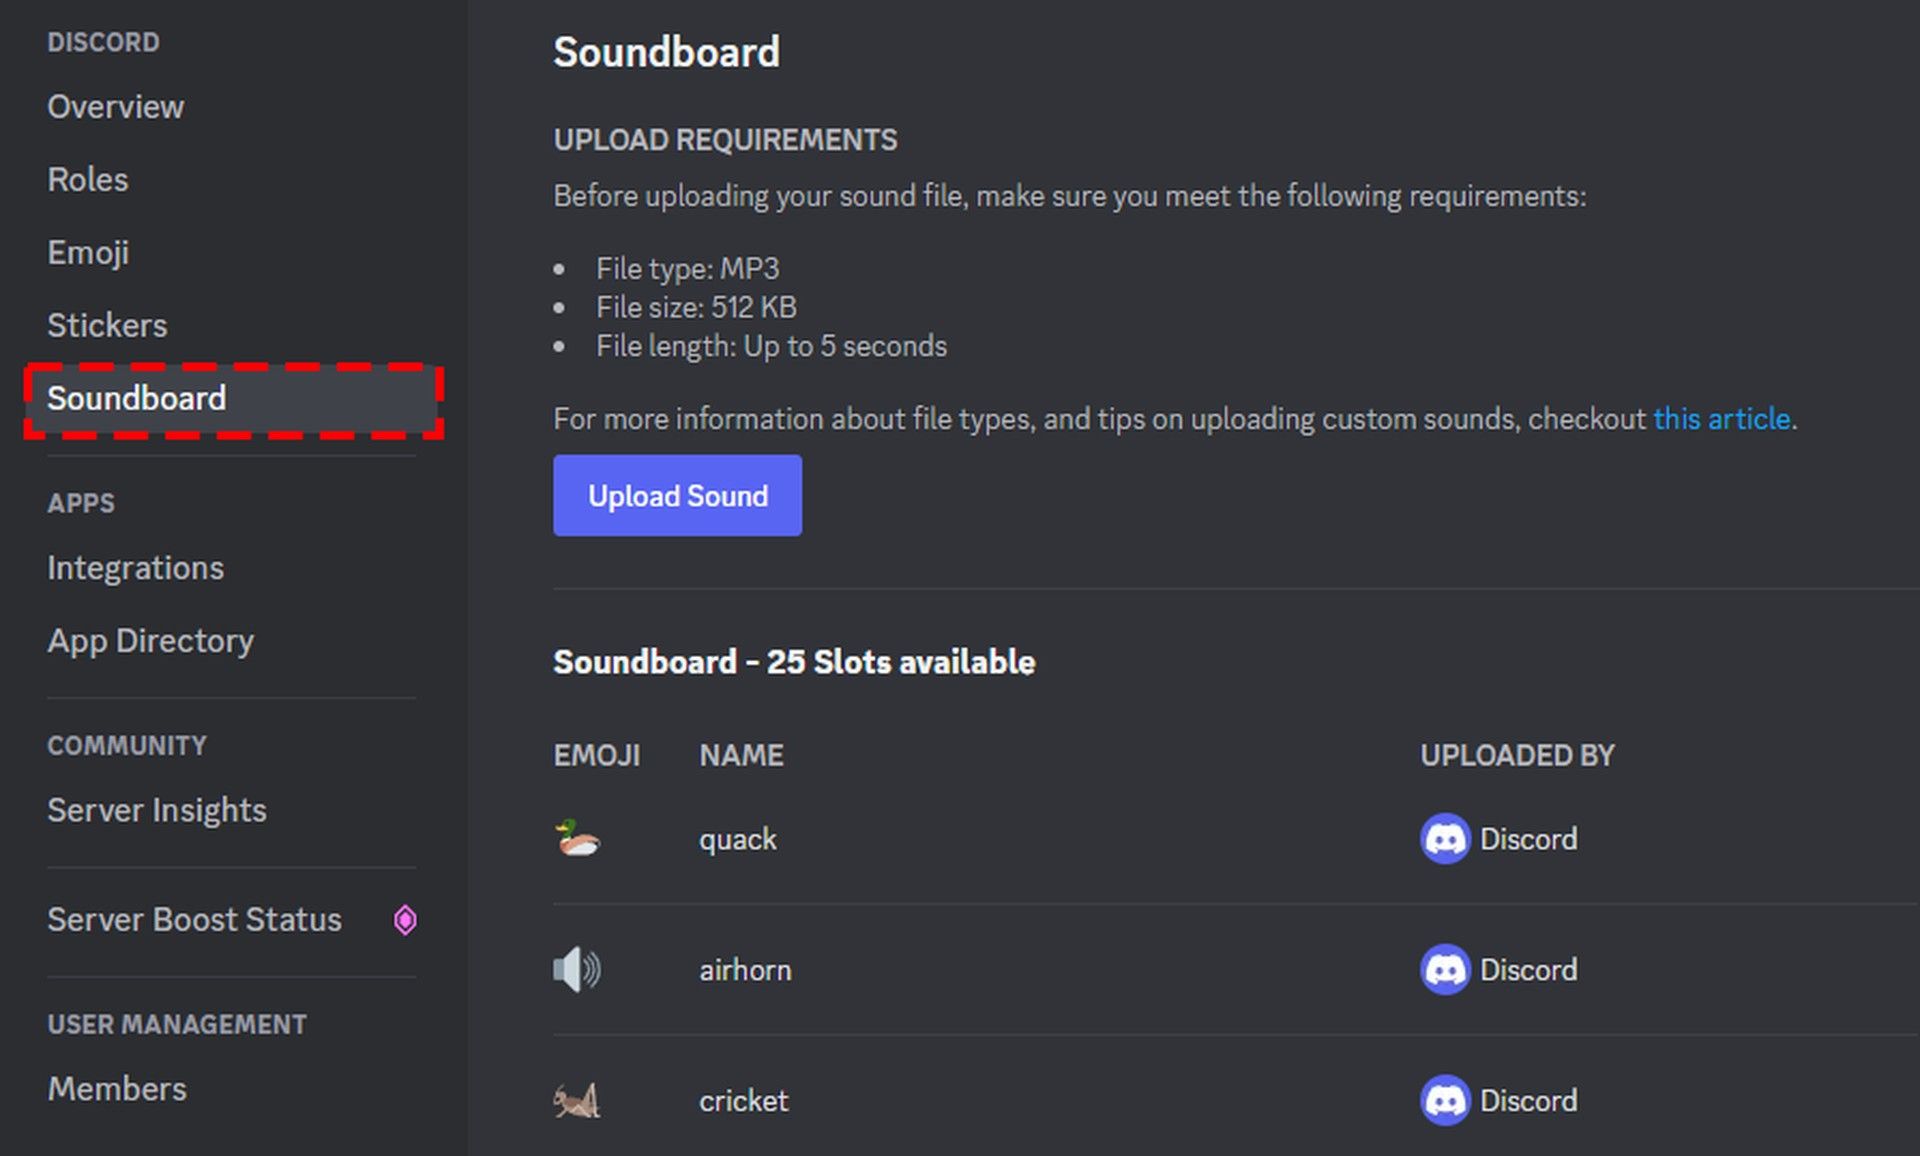 How to use Discord Soundboard